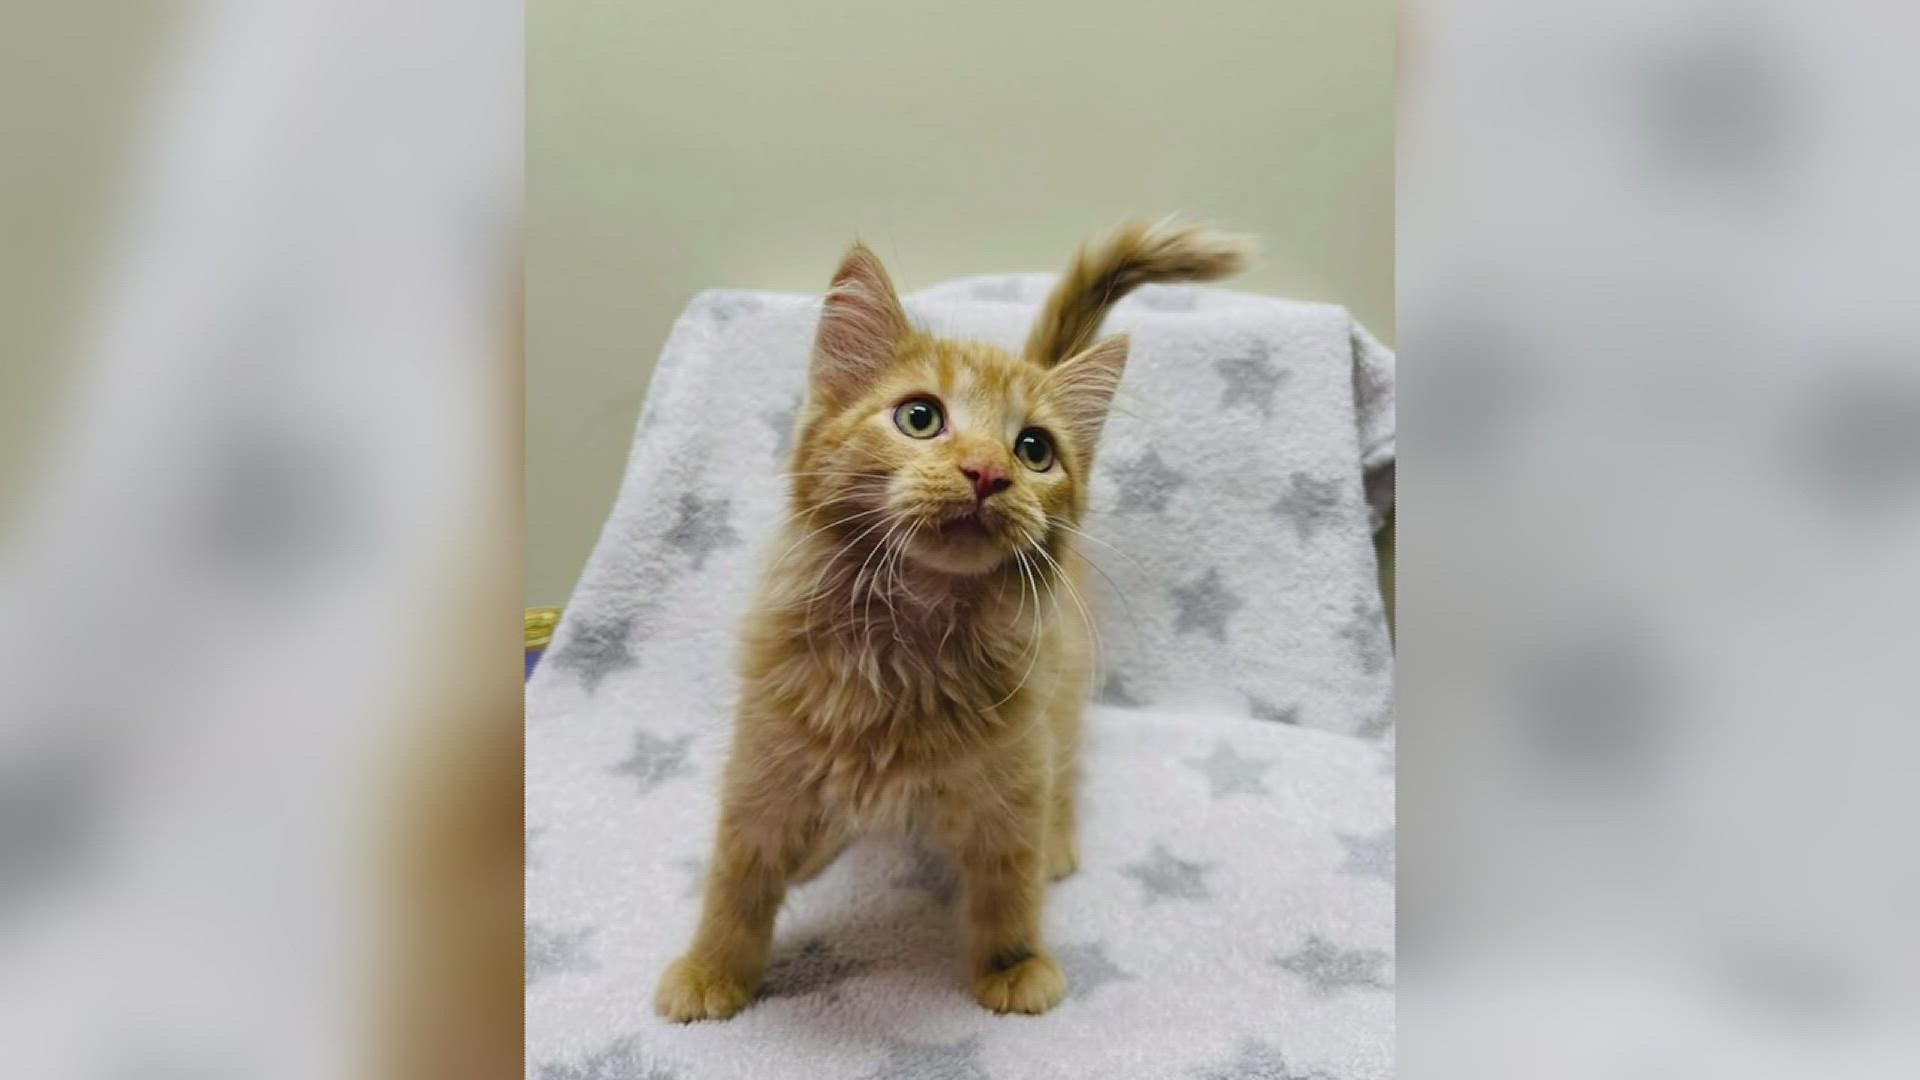 The Quad City Animal Welfare Center's Pet of the Week for Tuesday, October 19th, 2021 is Sprite the Kitten!